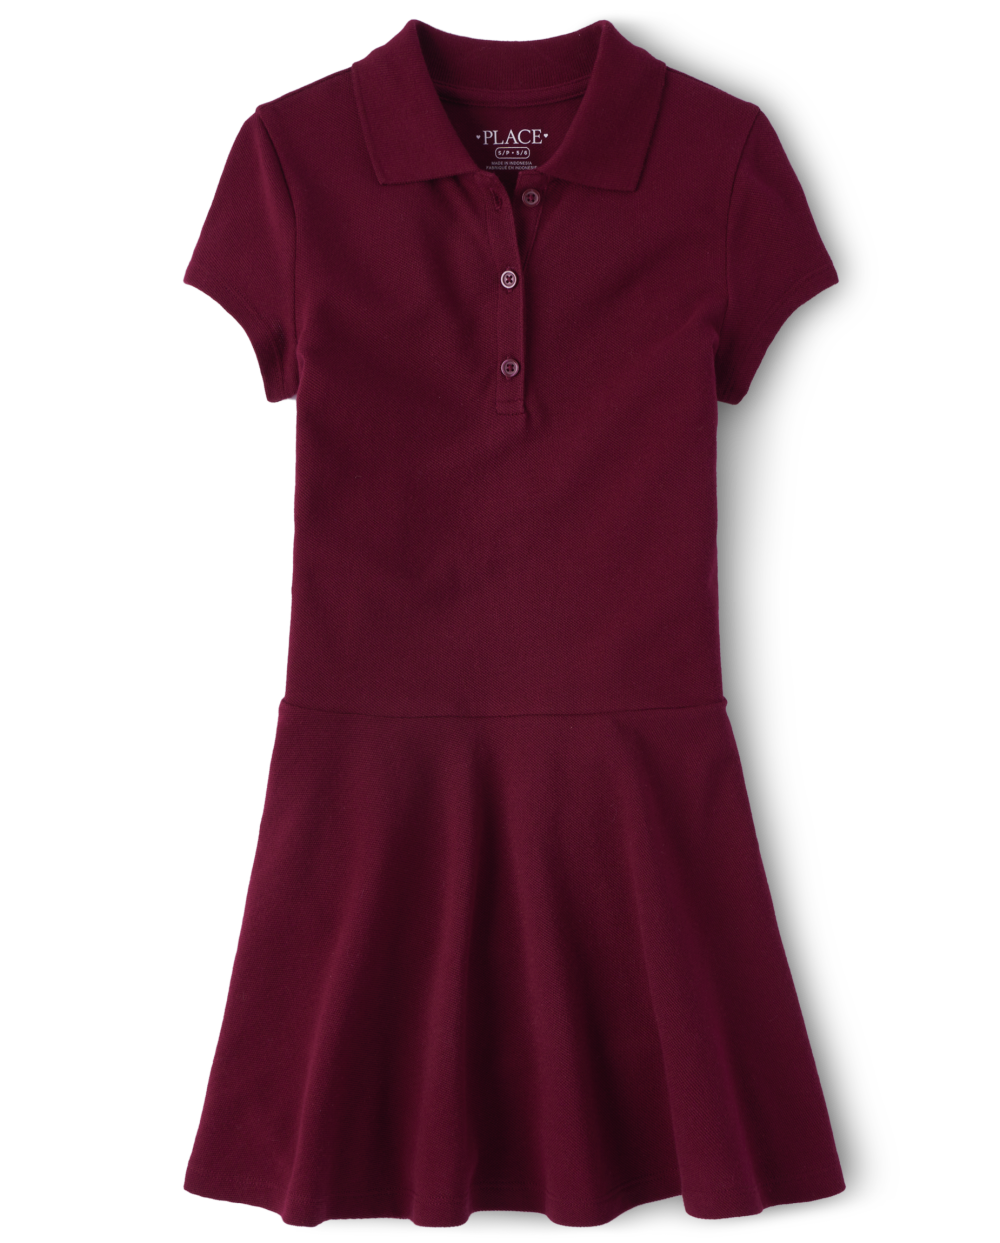 Girls Short Sleeves Sleeves Above the Knee Collared Dress